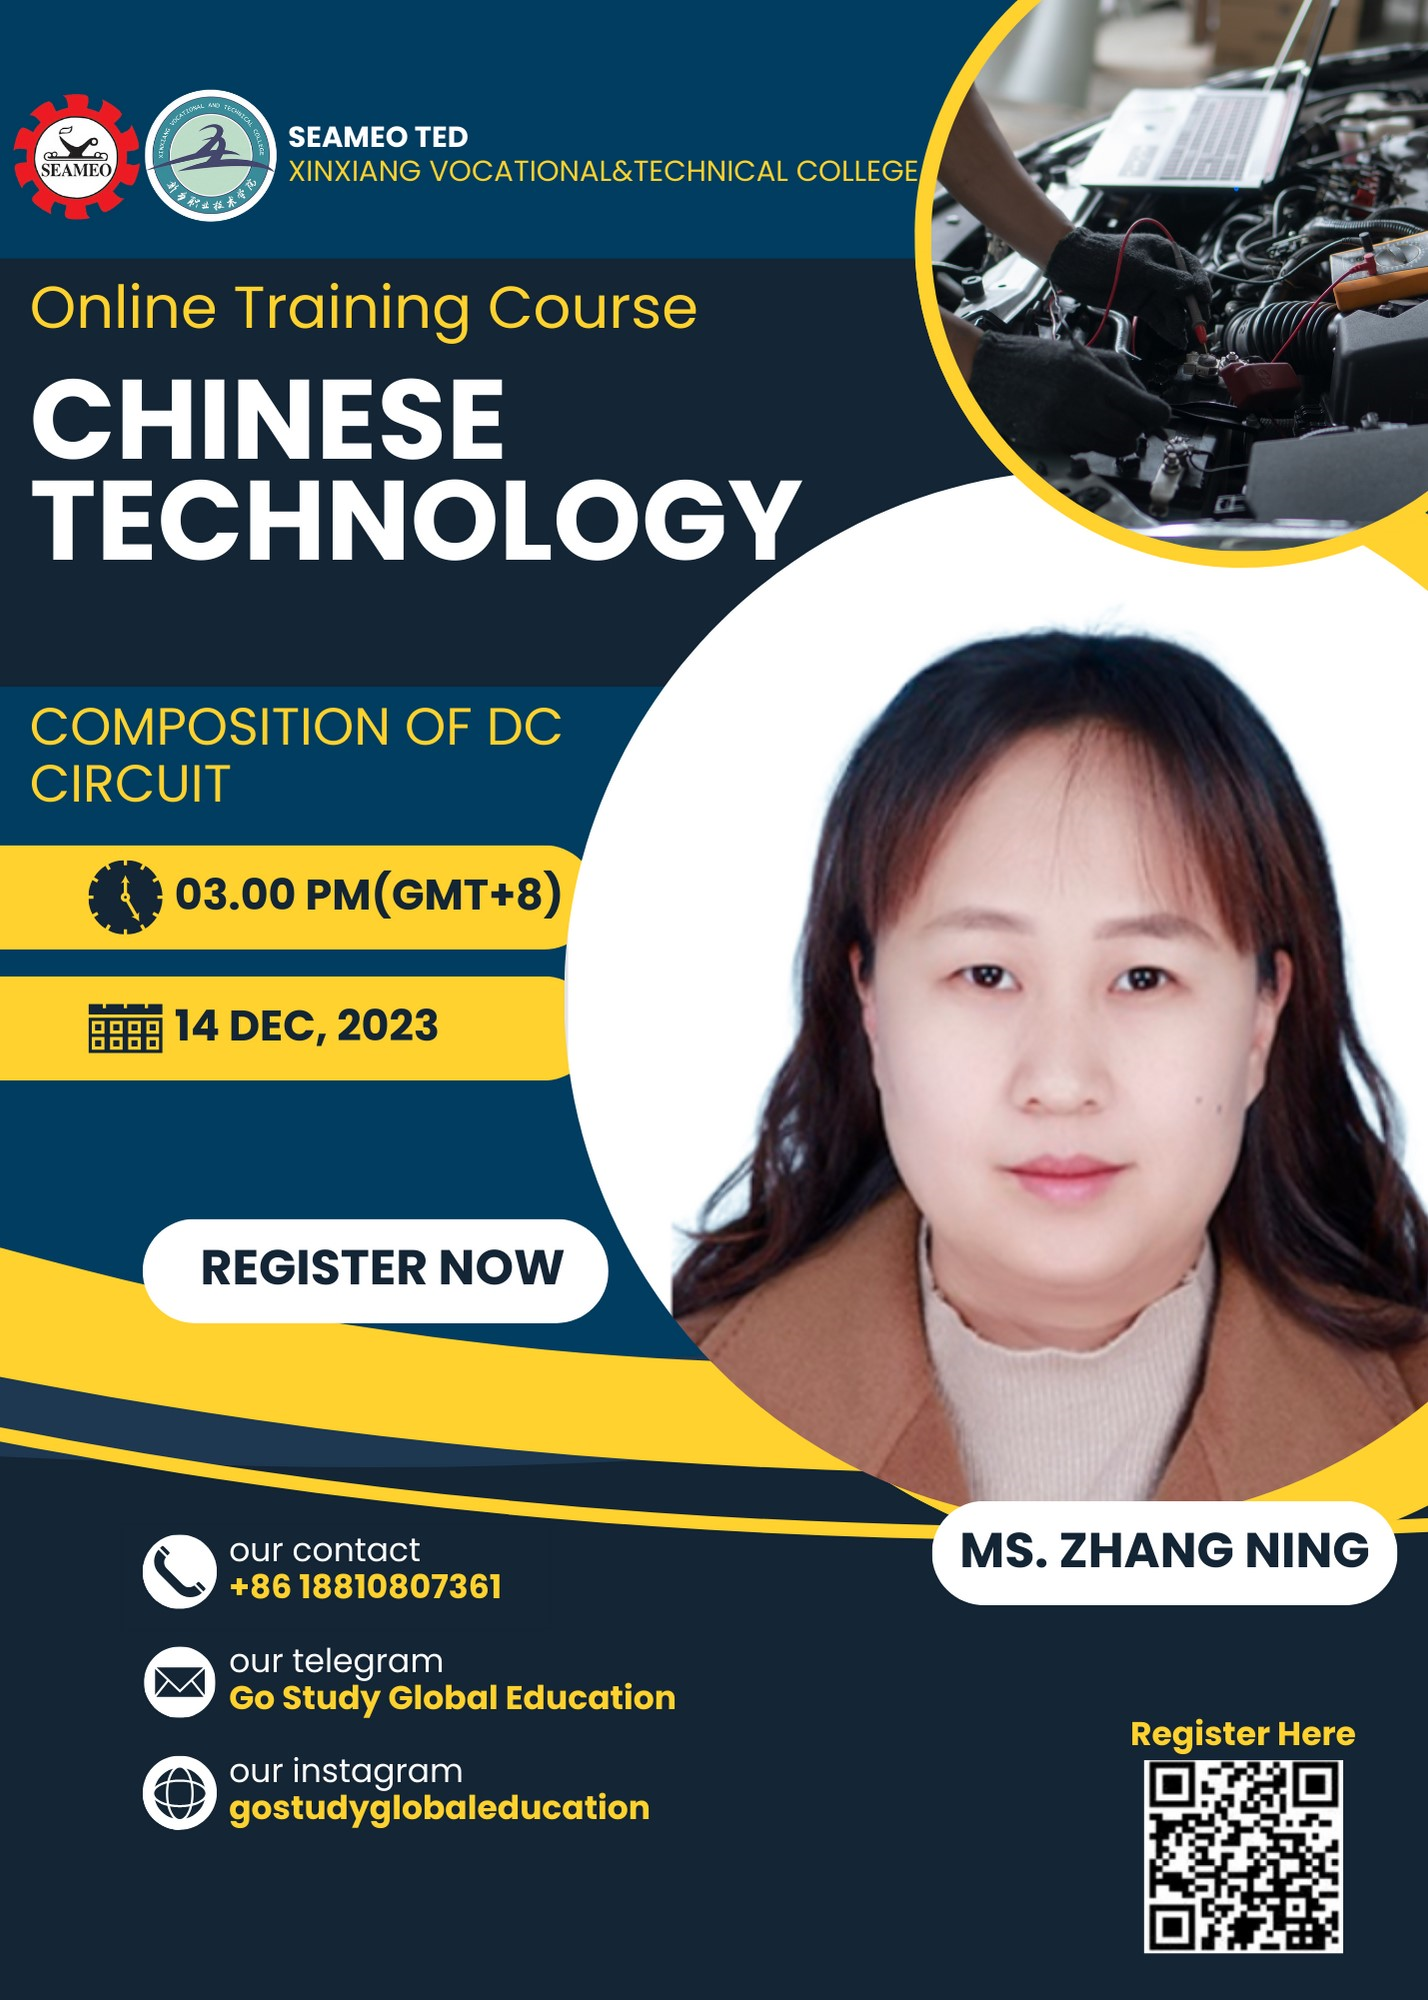 Online training on Chinese Automobile Technology